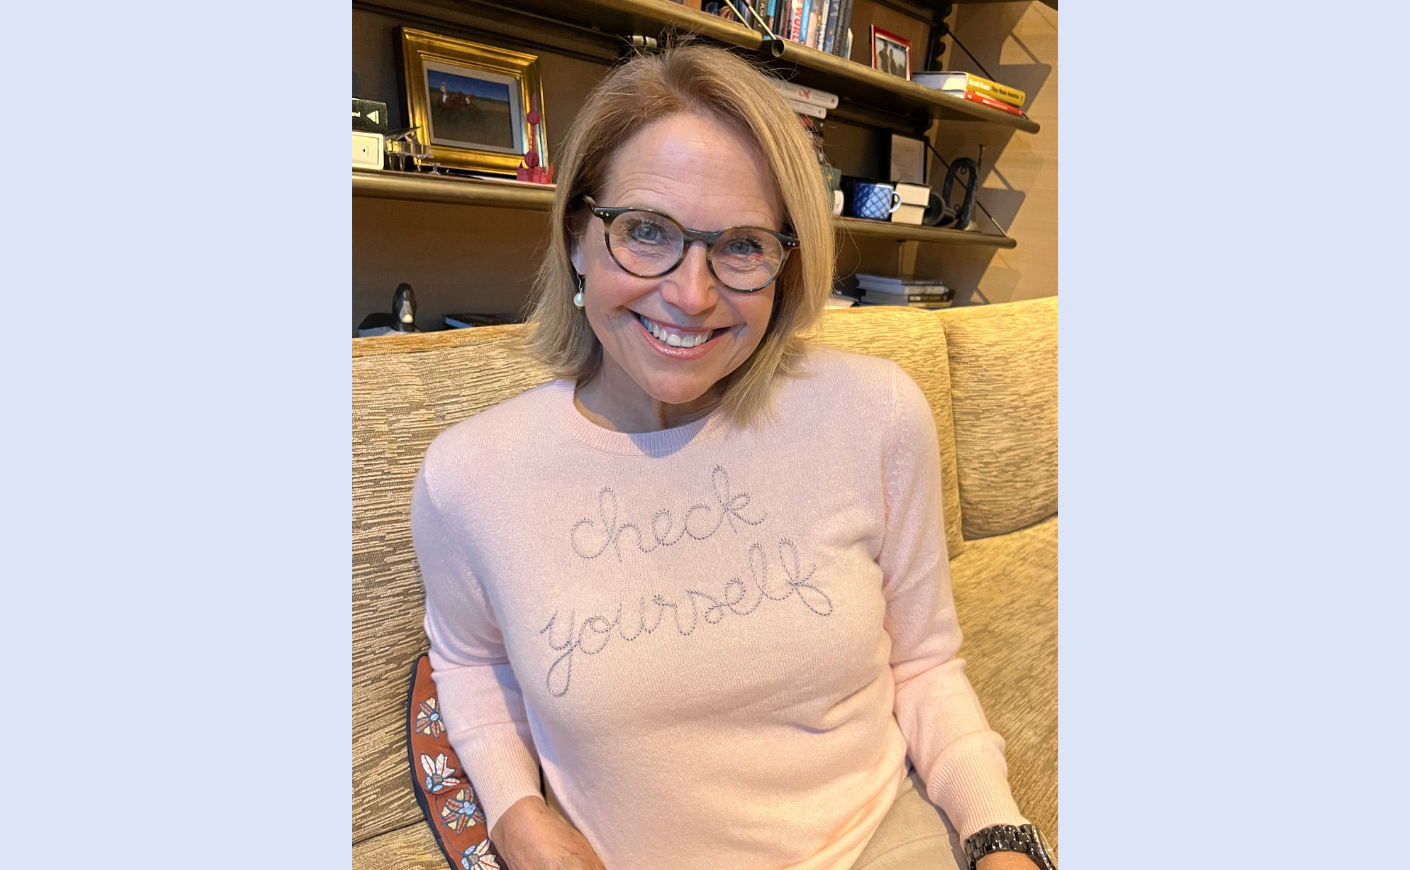 katie couric wearing a lingua franca sweater that says "check yourself"